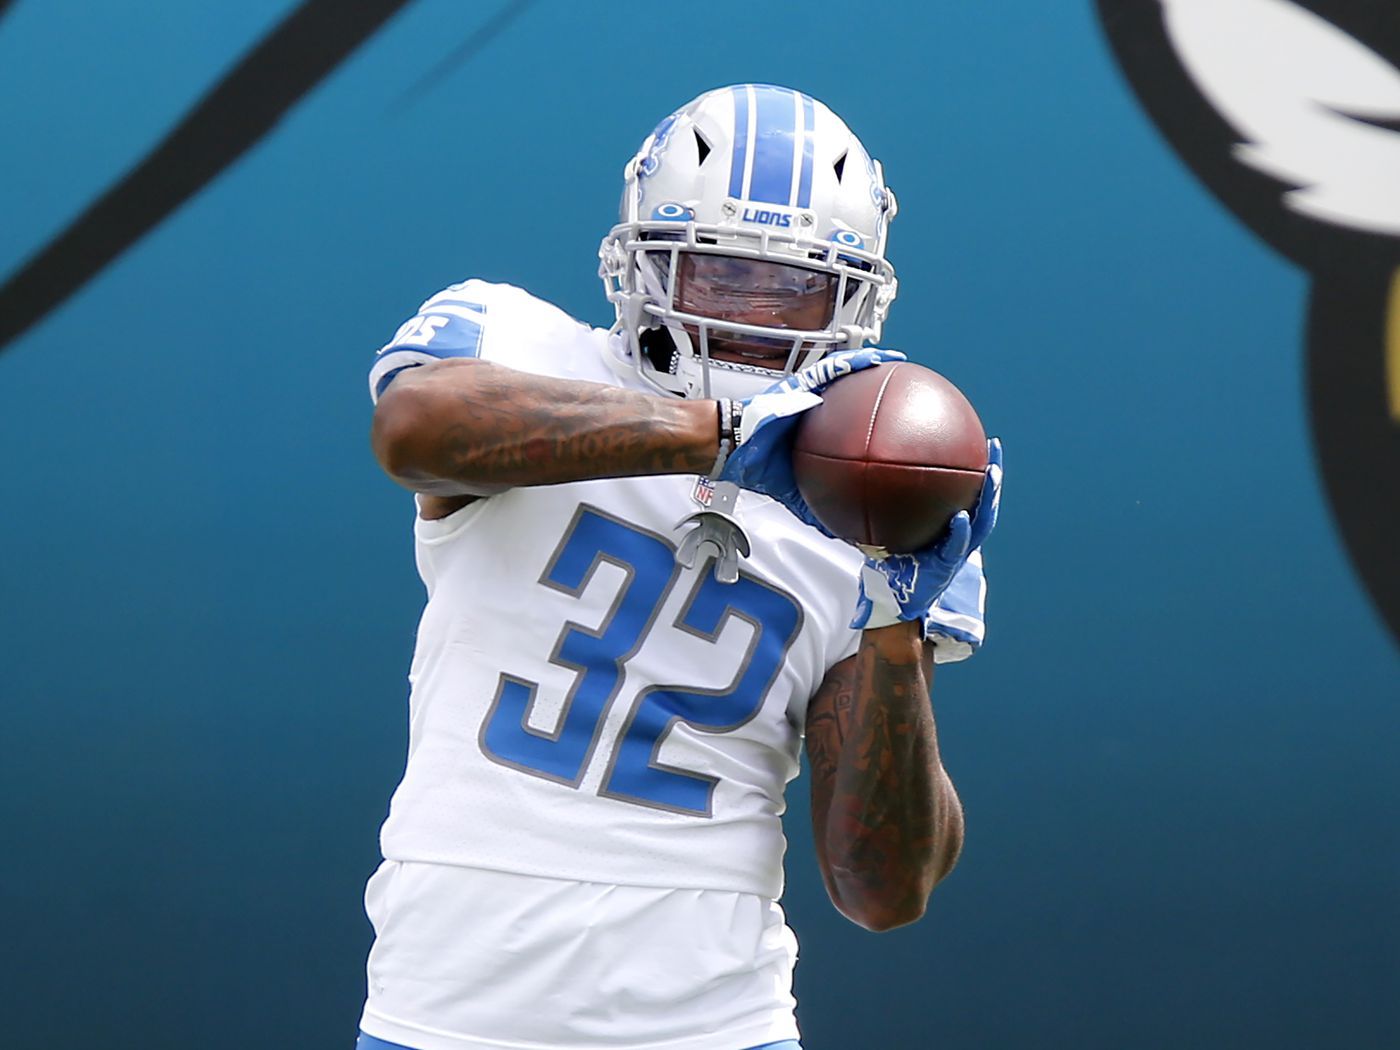 How much of the workload should D'Andre Swift get going forward? Of Detroit